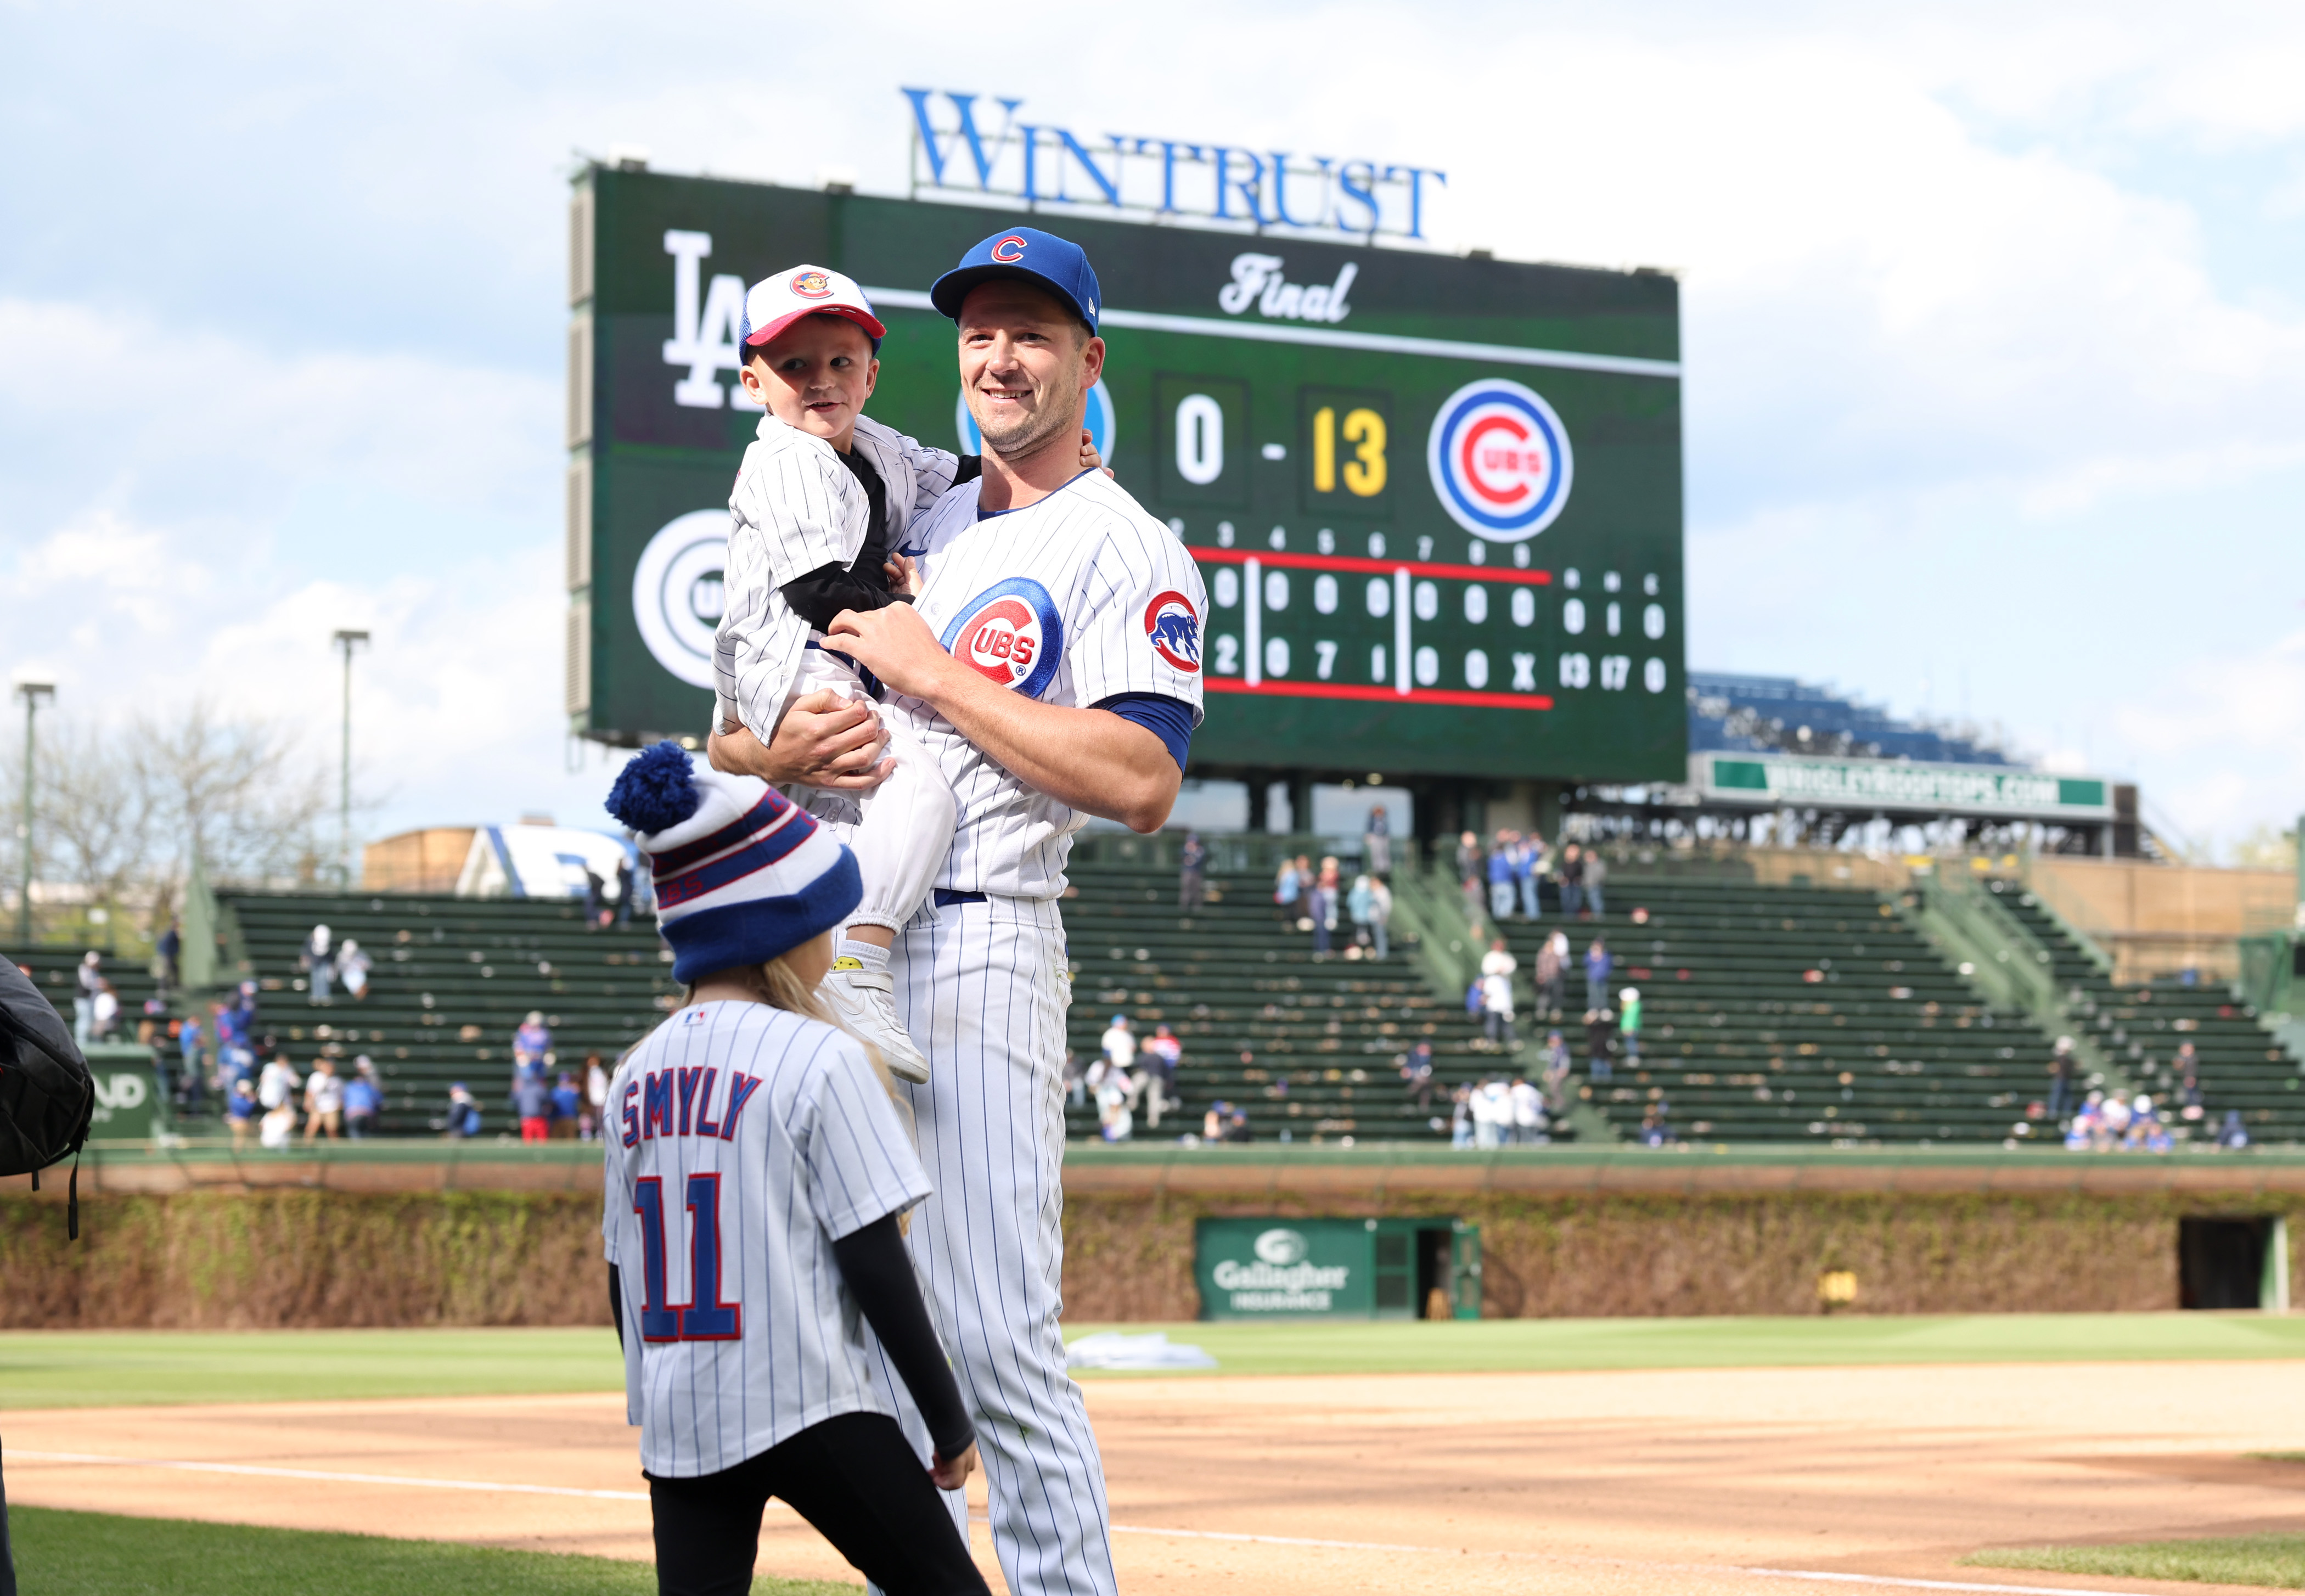 Cubs' Smyly flirts with perfect game